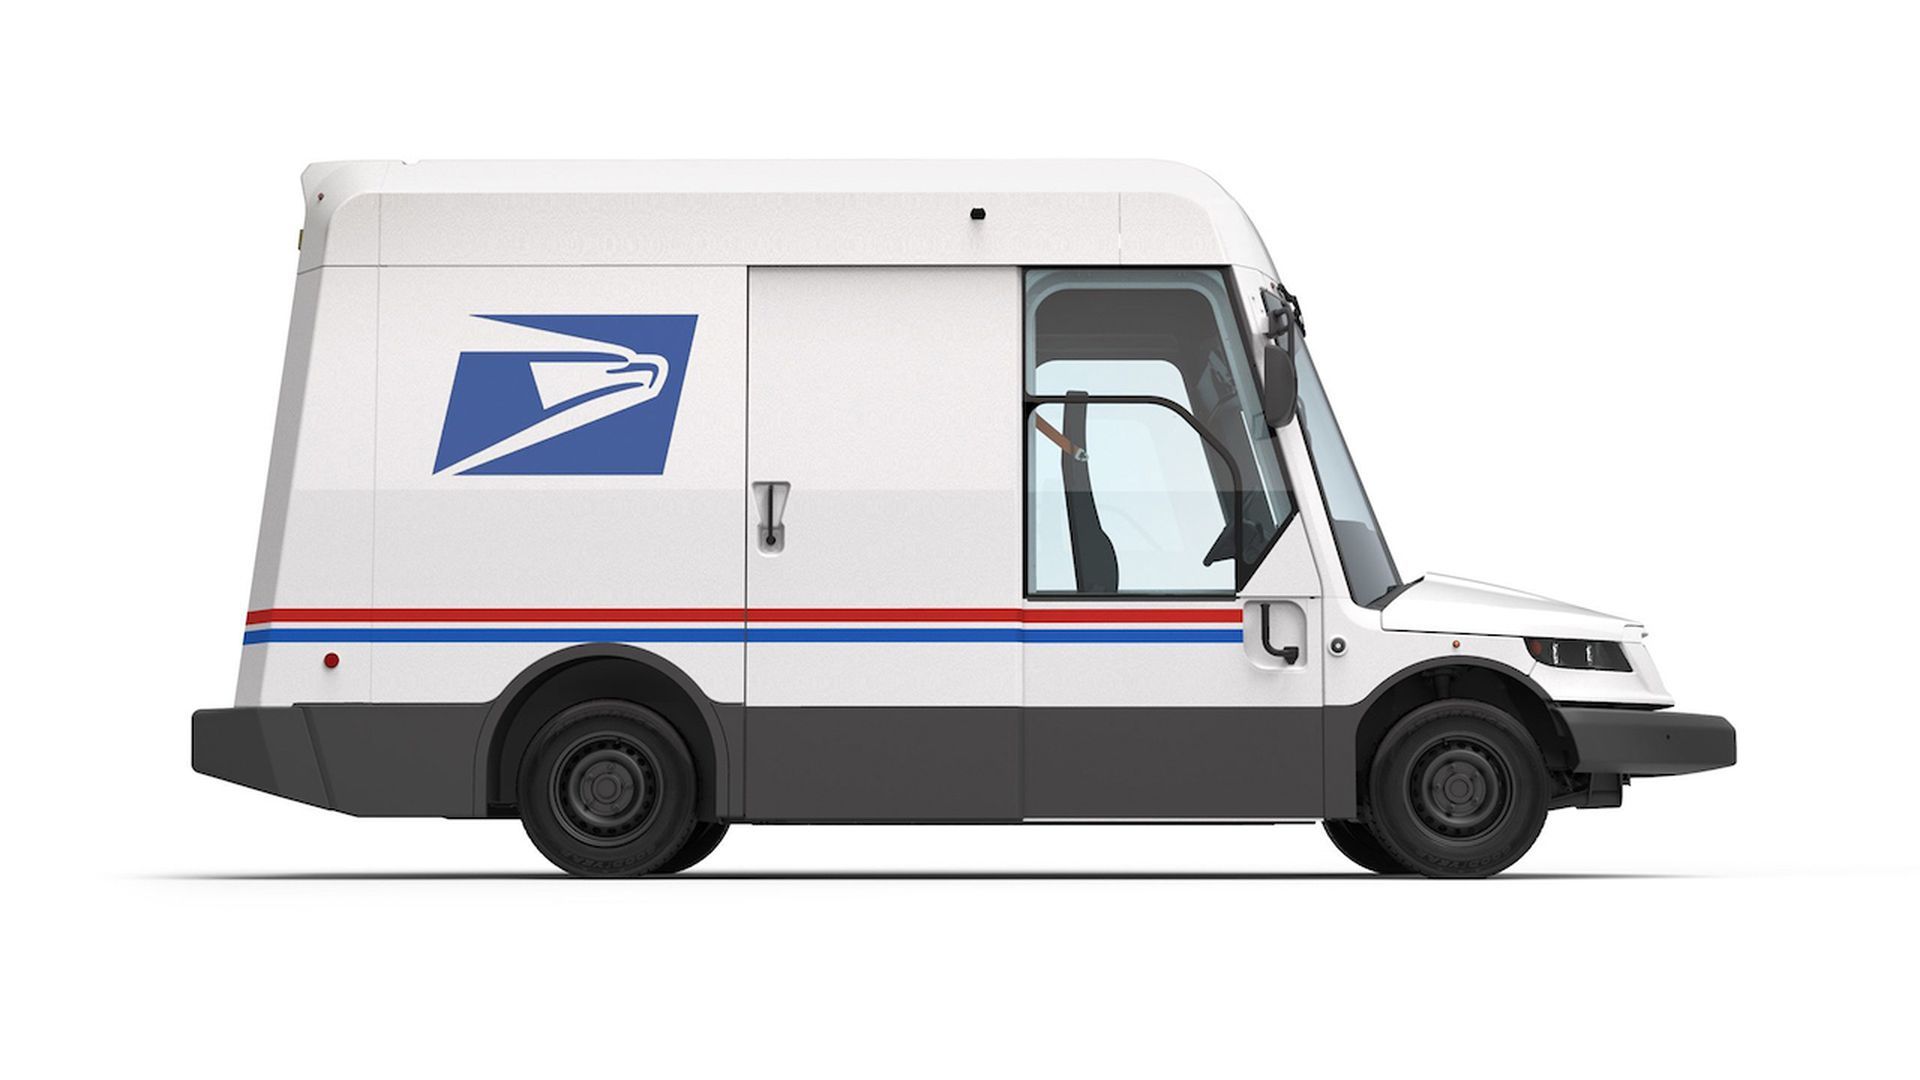 A rendering of the U.S. Postal Service's Next Generation Delivery Vehicle.